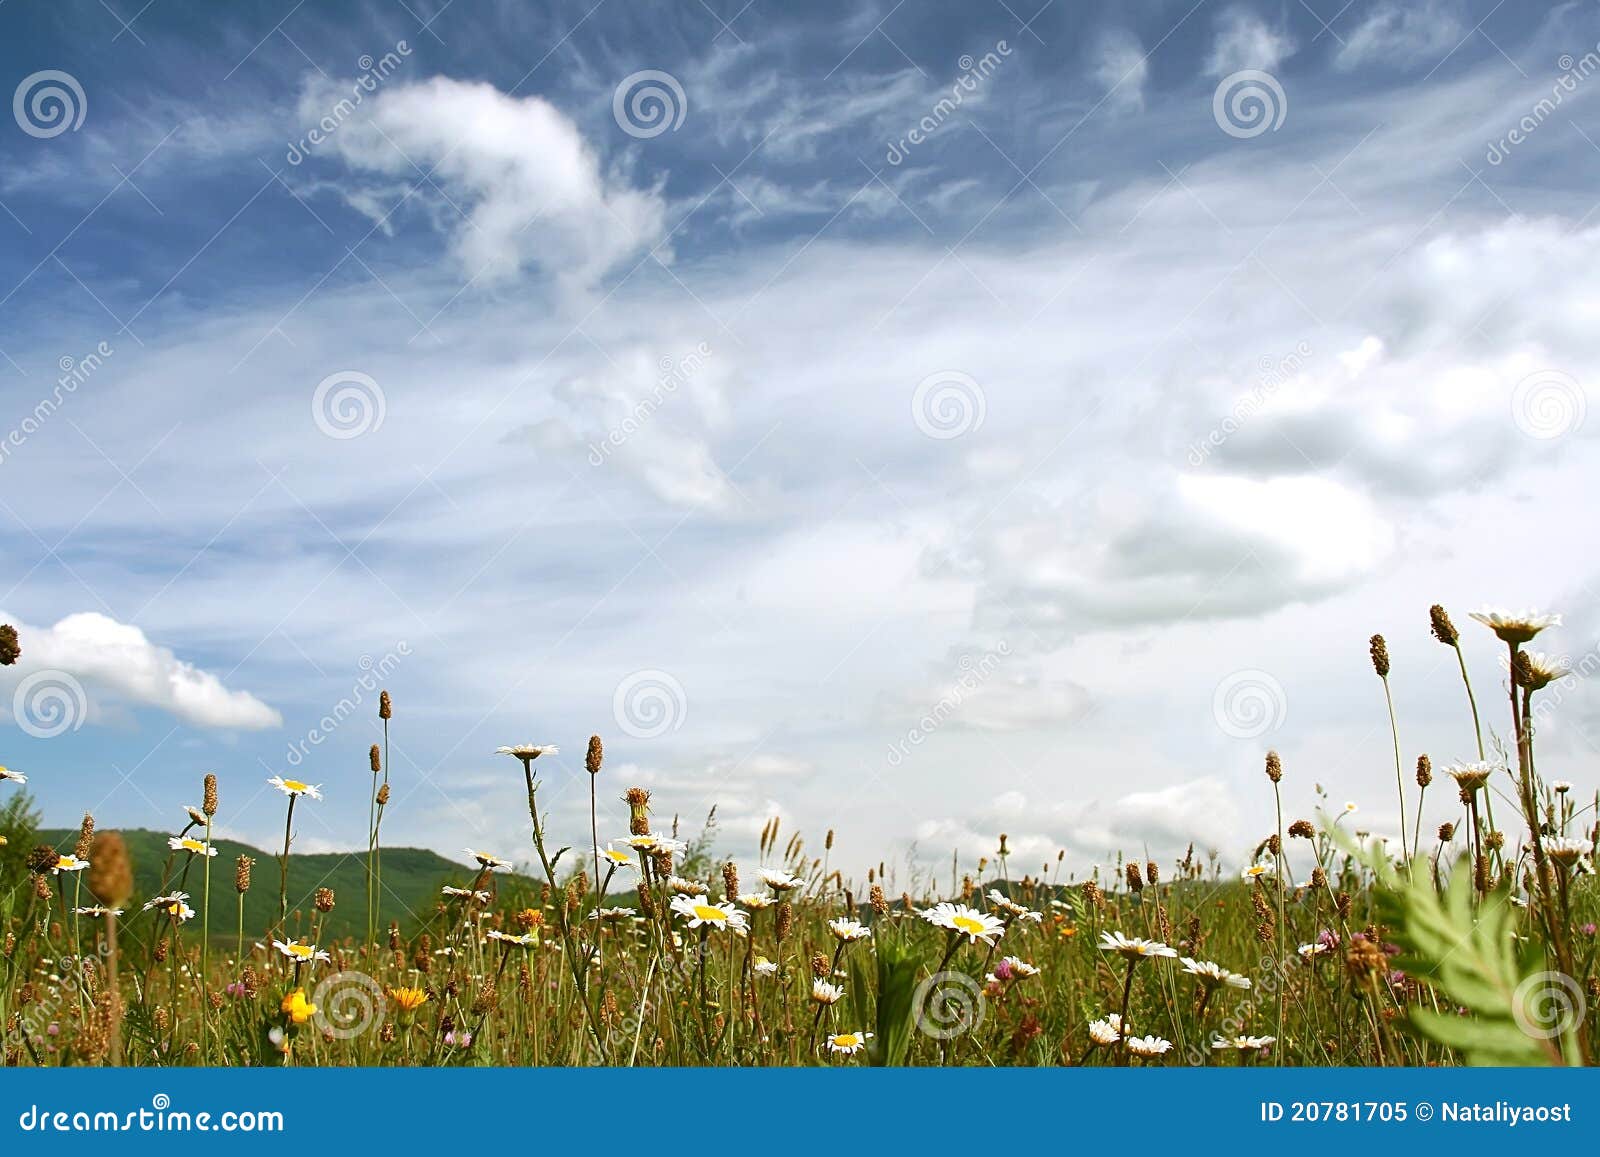 Fine clear morning in mountains on a flower glade